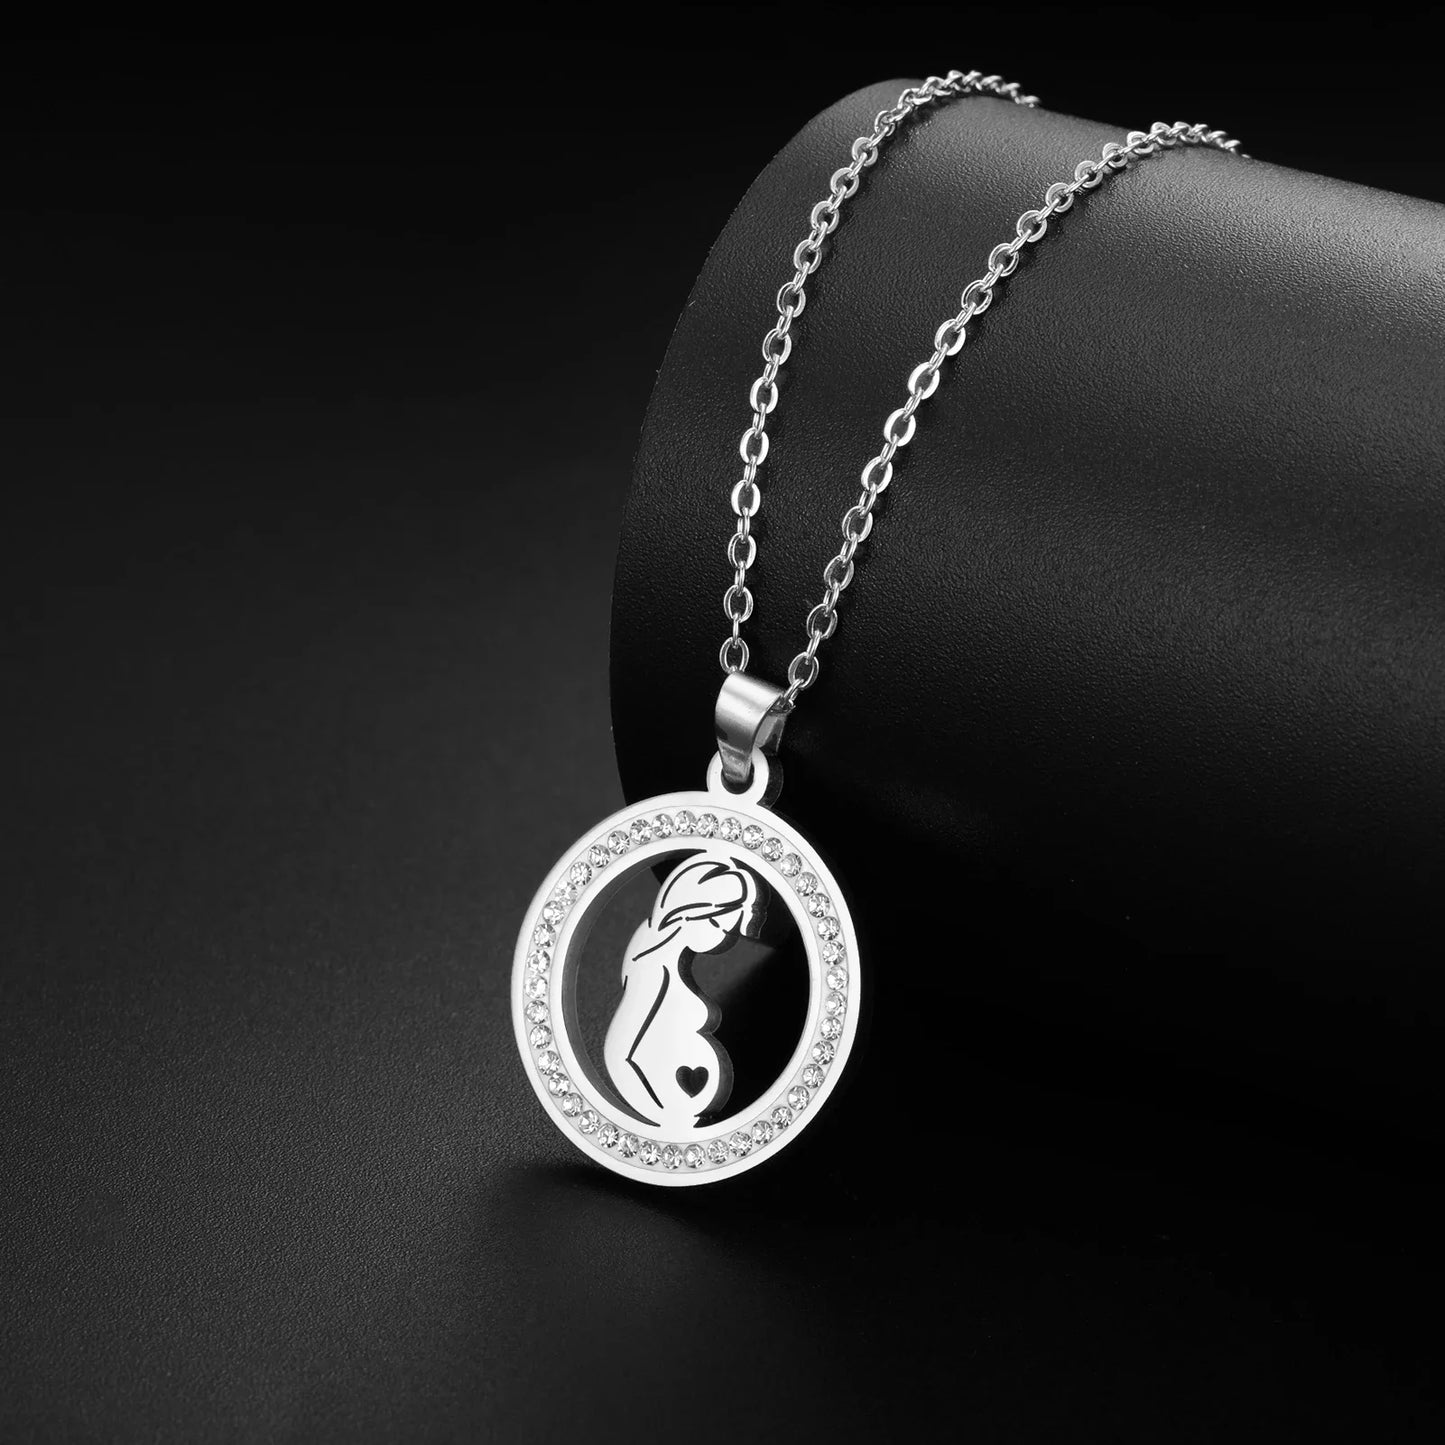 Mother and Child Pendant Necklace